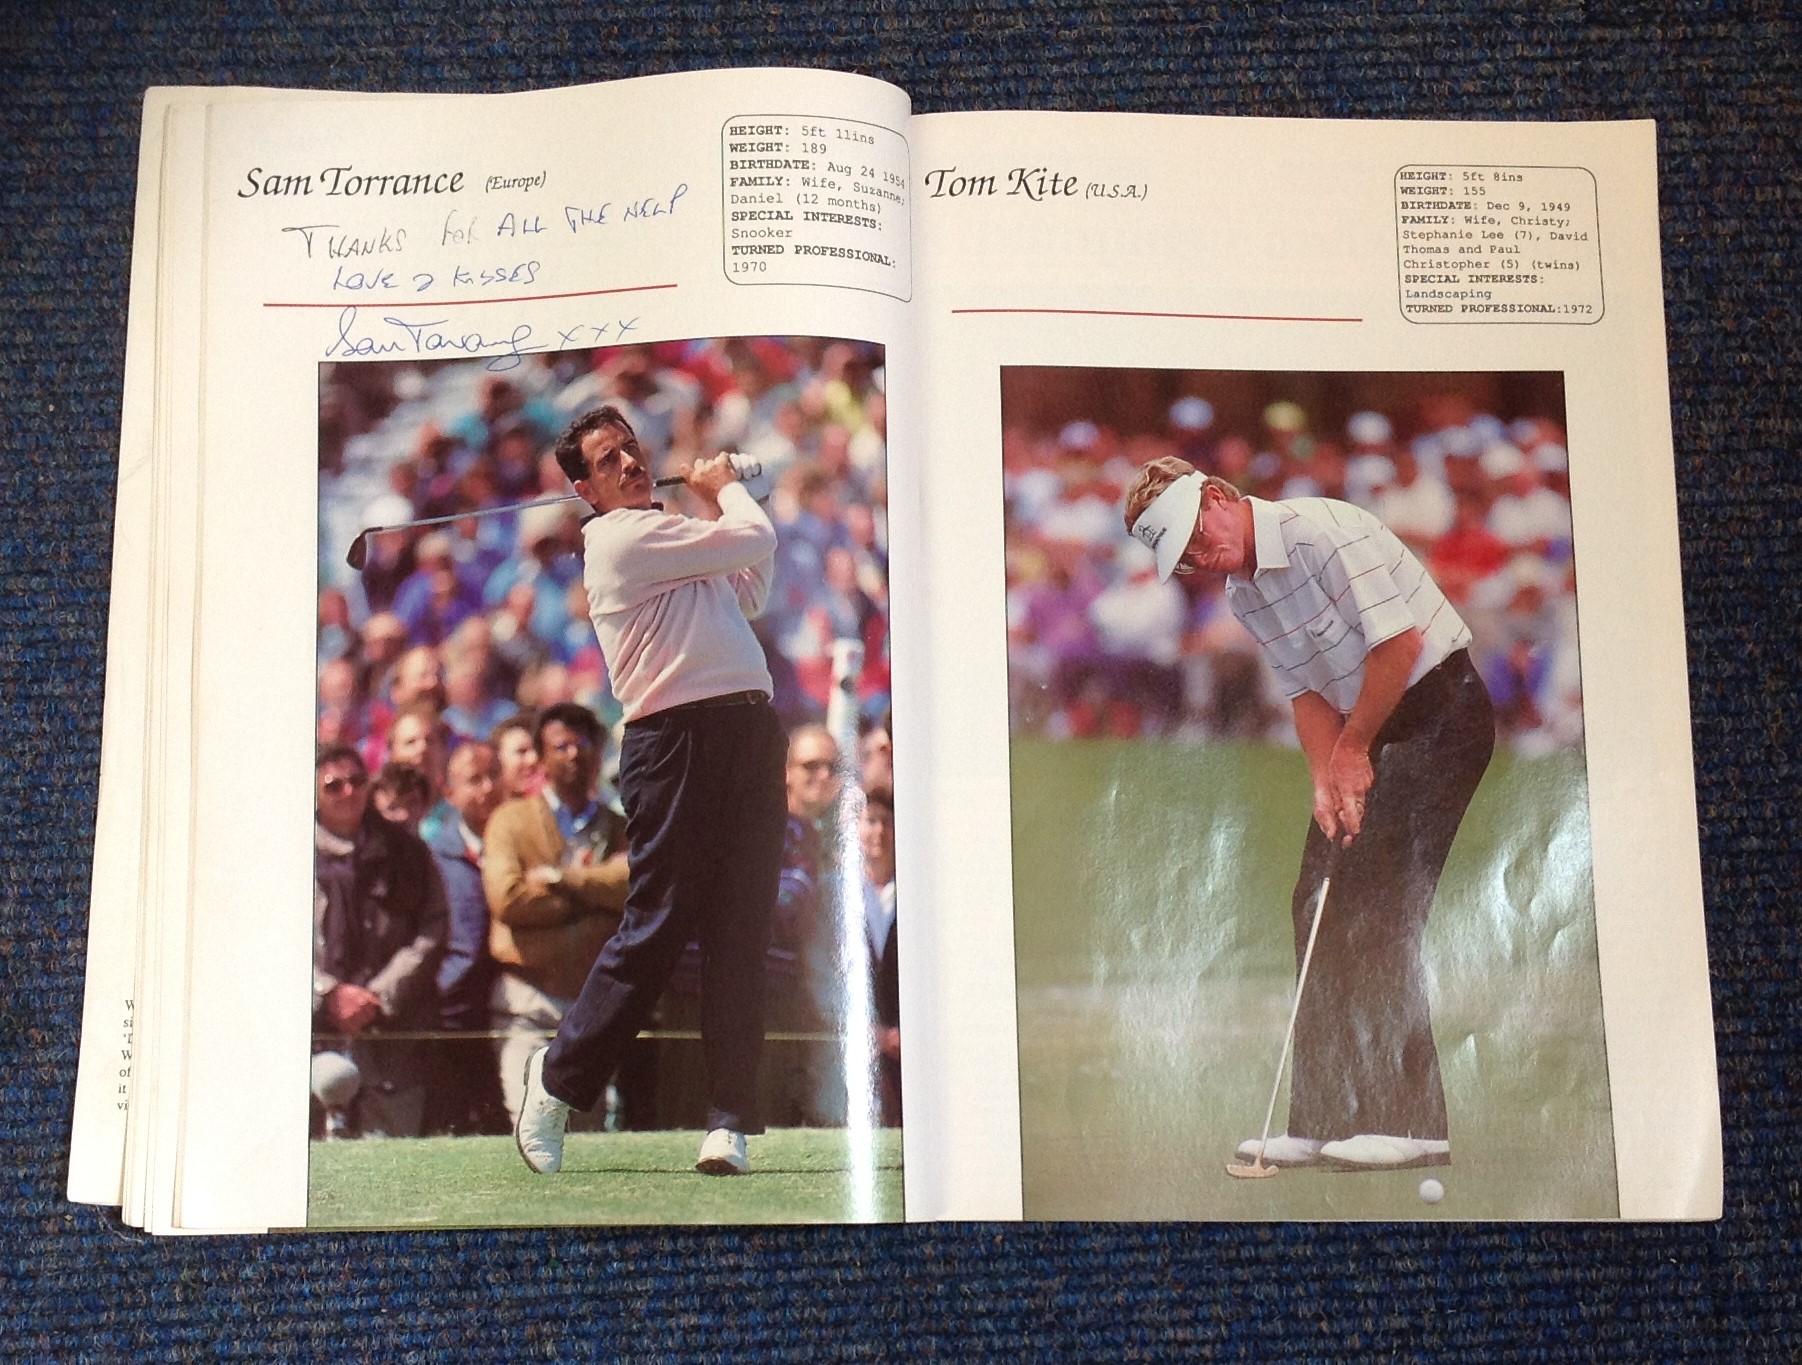 Golf 1989 Ryder Cup signed Golfers News paperback book 12 signatures includes legends of the game - Image 5 of 5